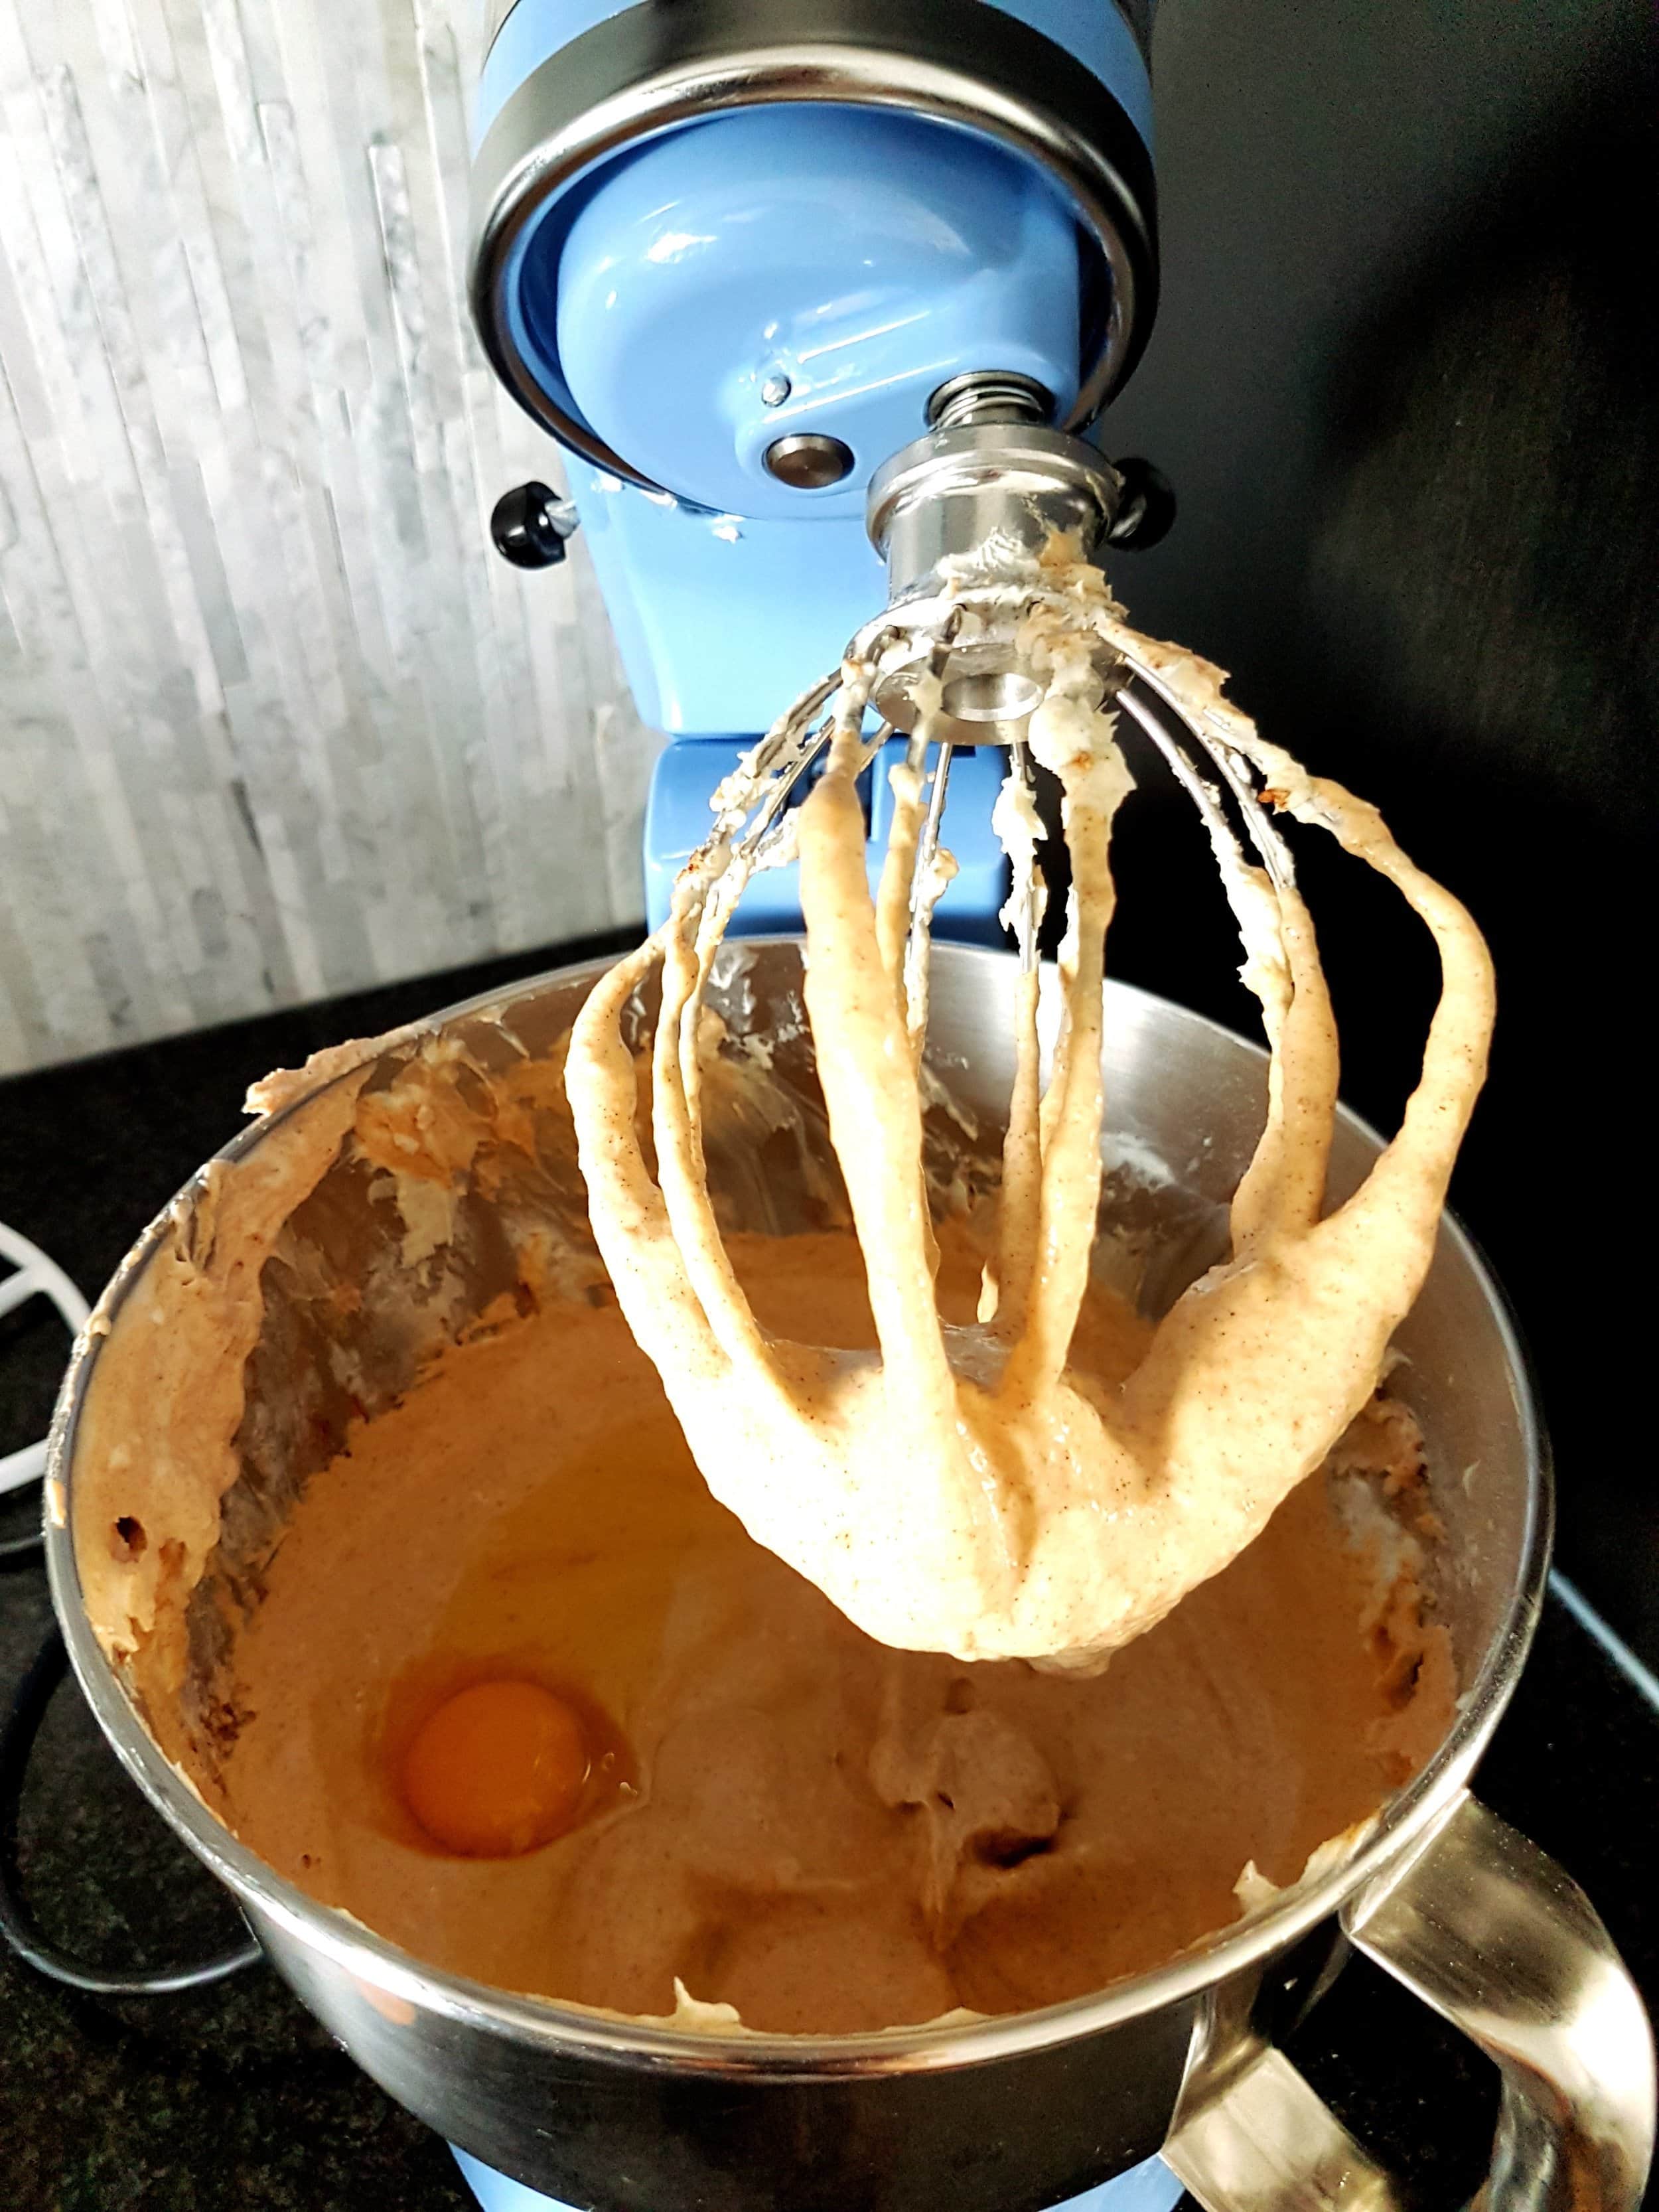 Cheesecake batter in a stand mixer.